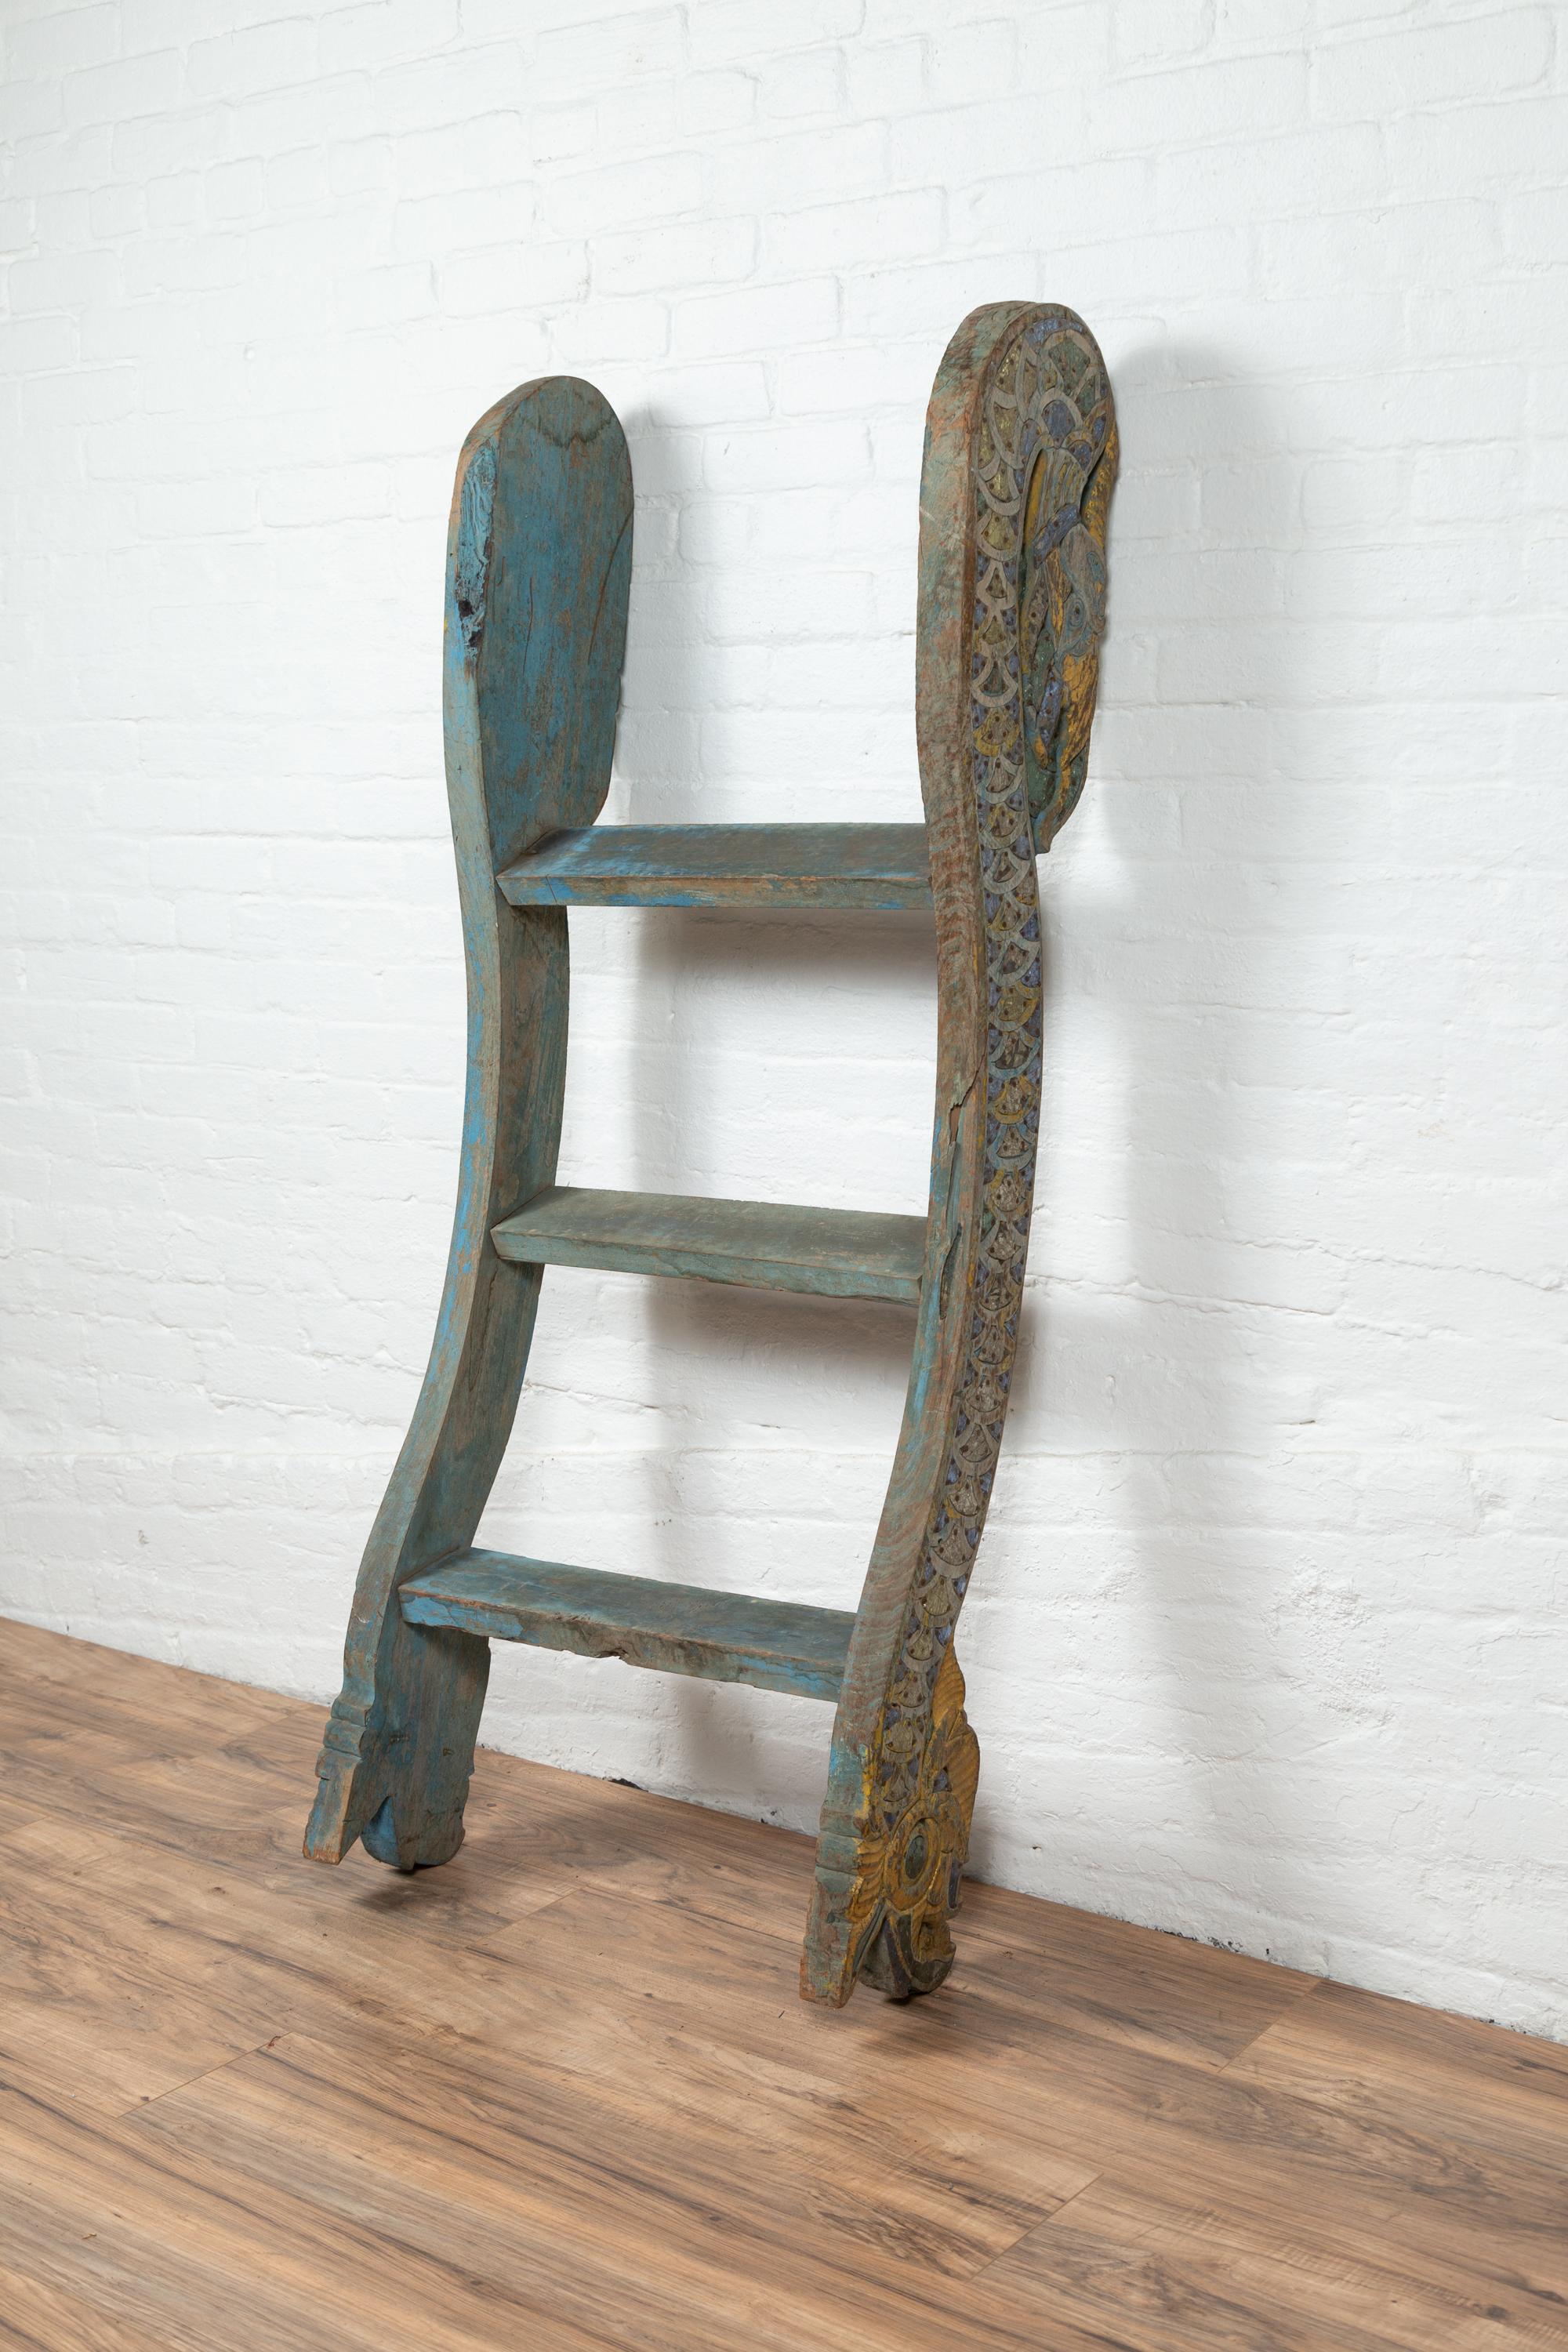 20th Century Antique Indonesian Blue Painted and Carved Ladder with Green and Gold Accents